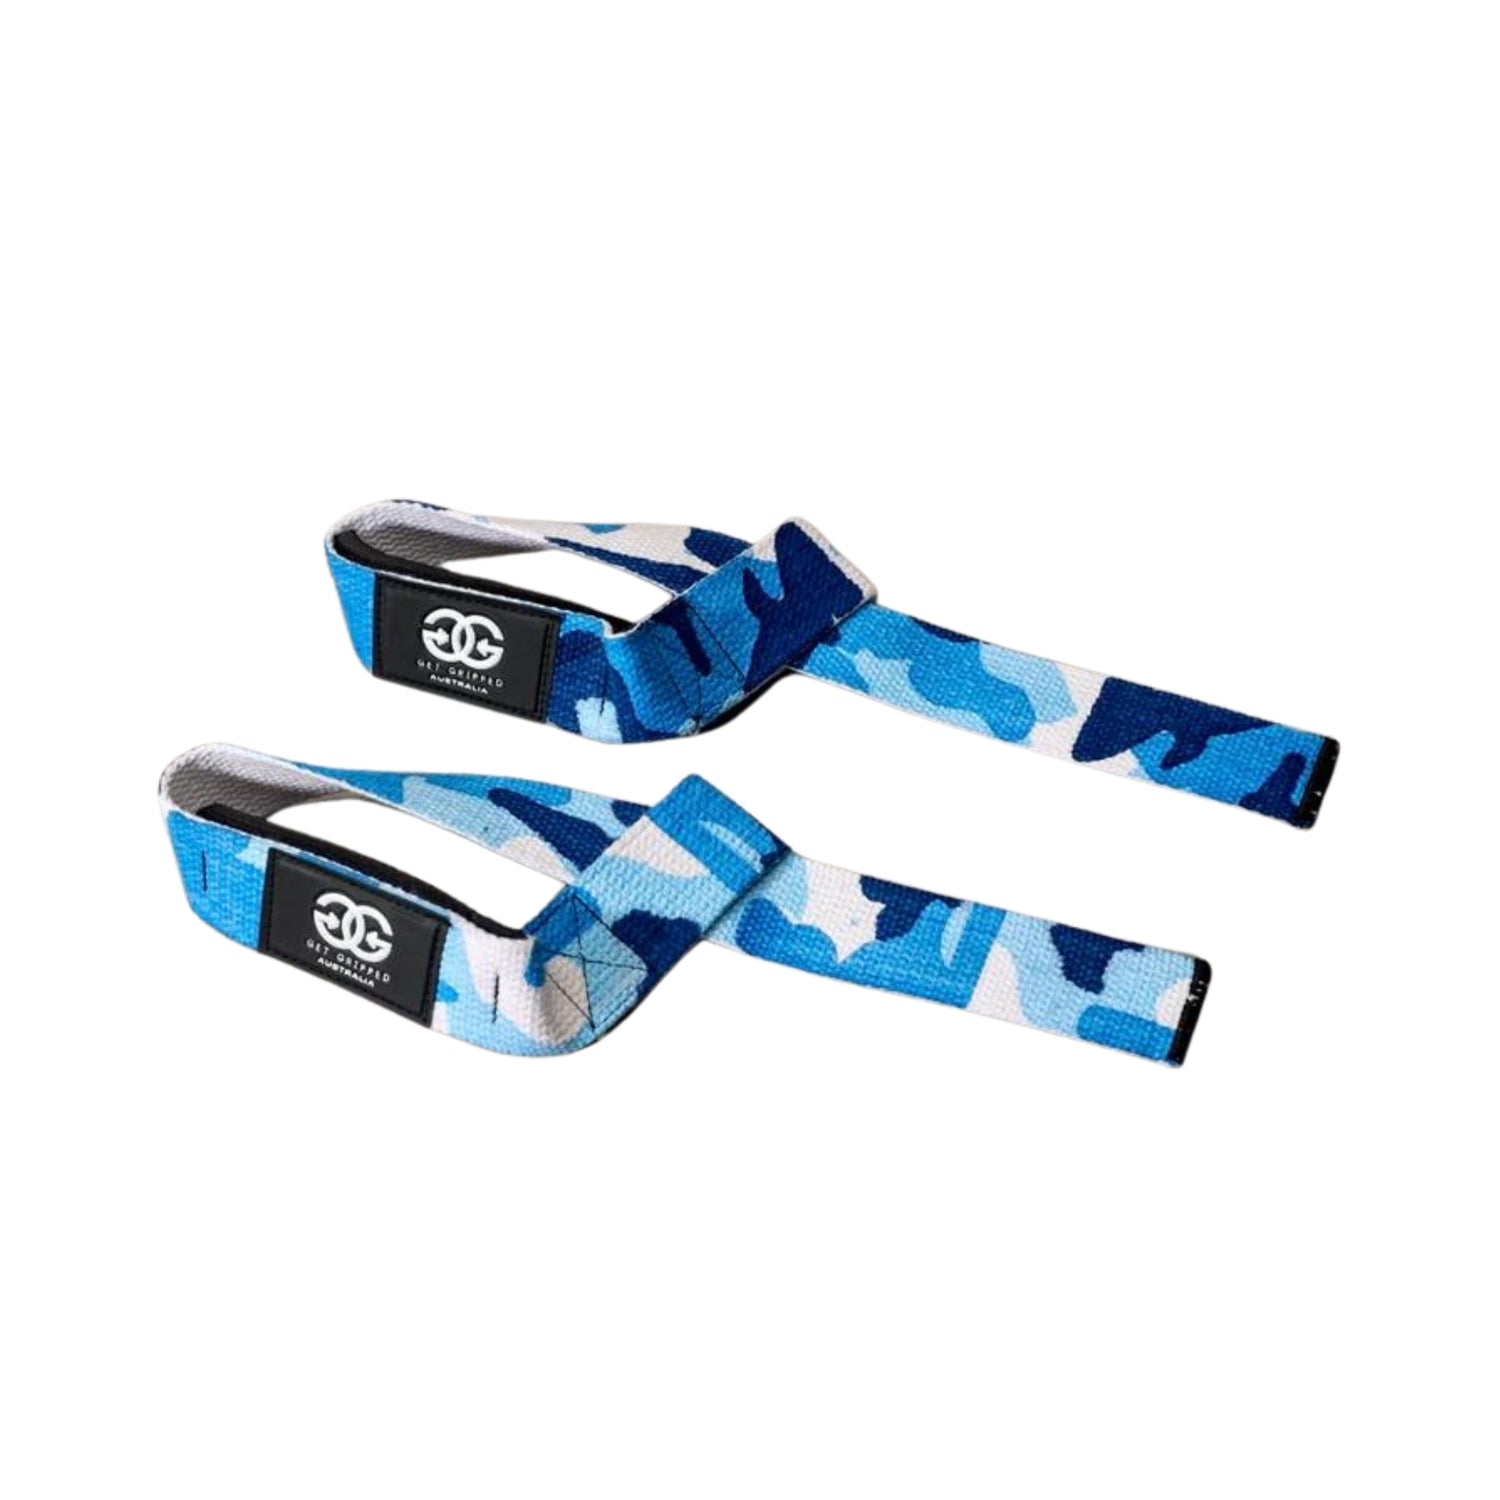 Get Gripped Single Tail Strap Blue Camo